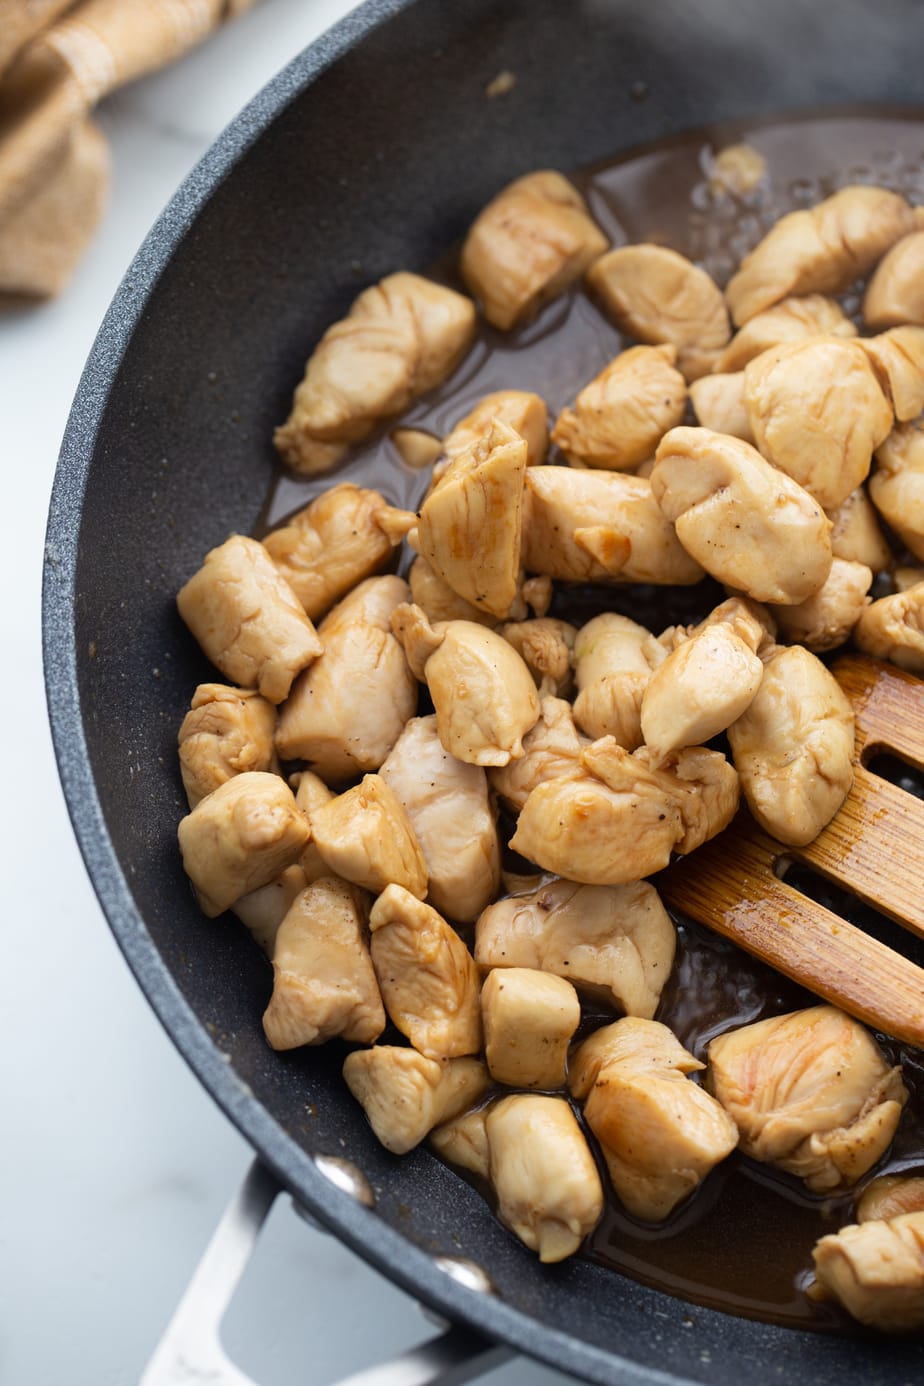 Browned chicken is being stirred by a wooden spoon in a black skillet.